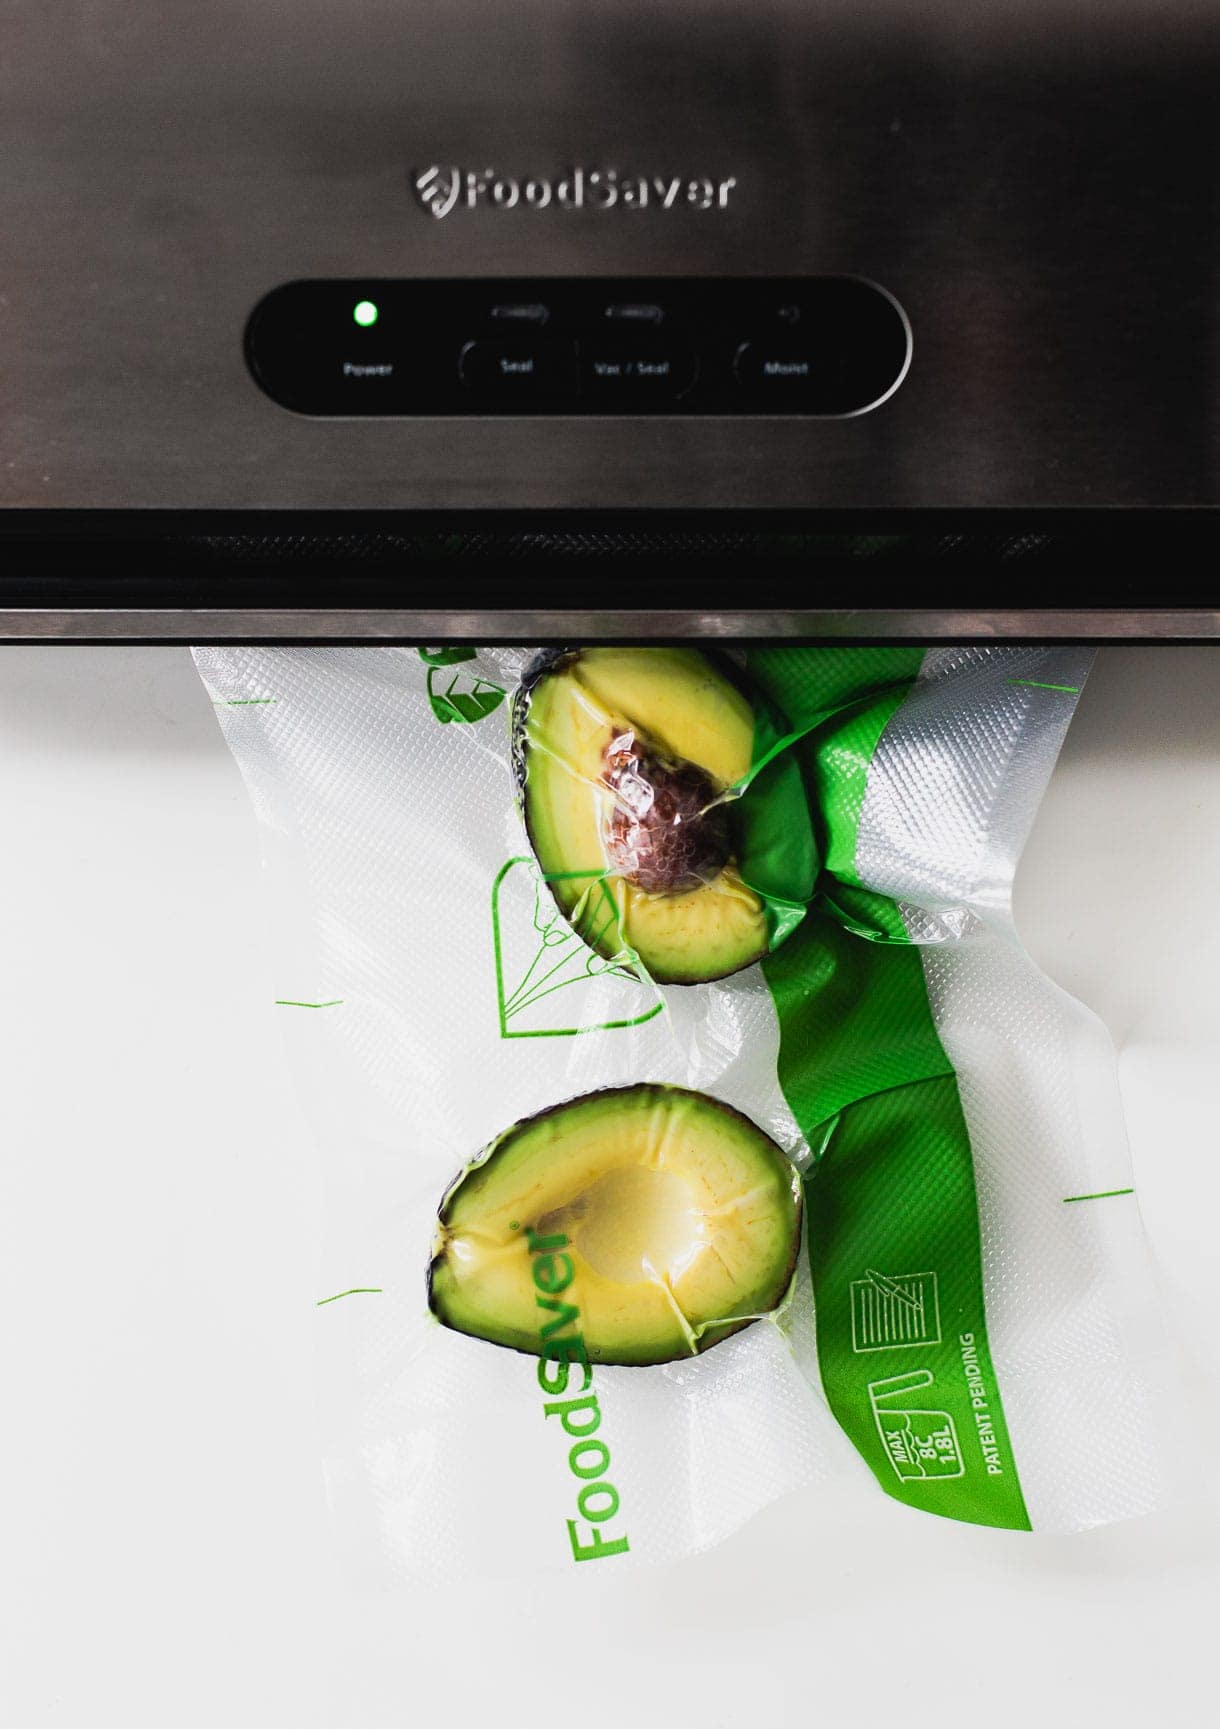 FoodSaver Keeps an Avocado from Turning Brown!